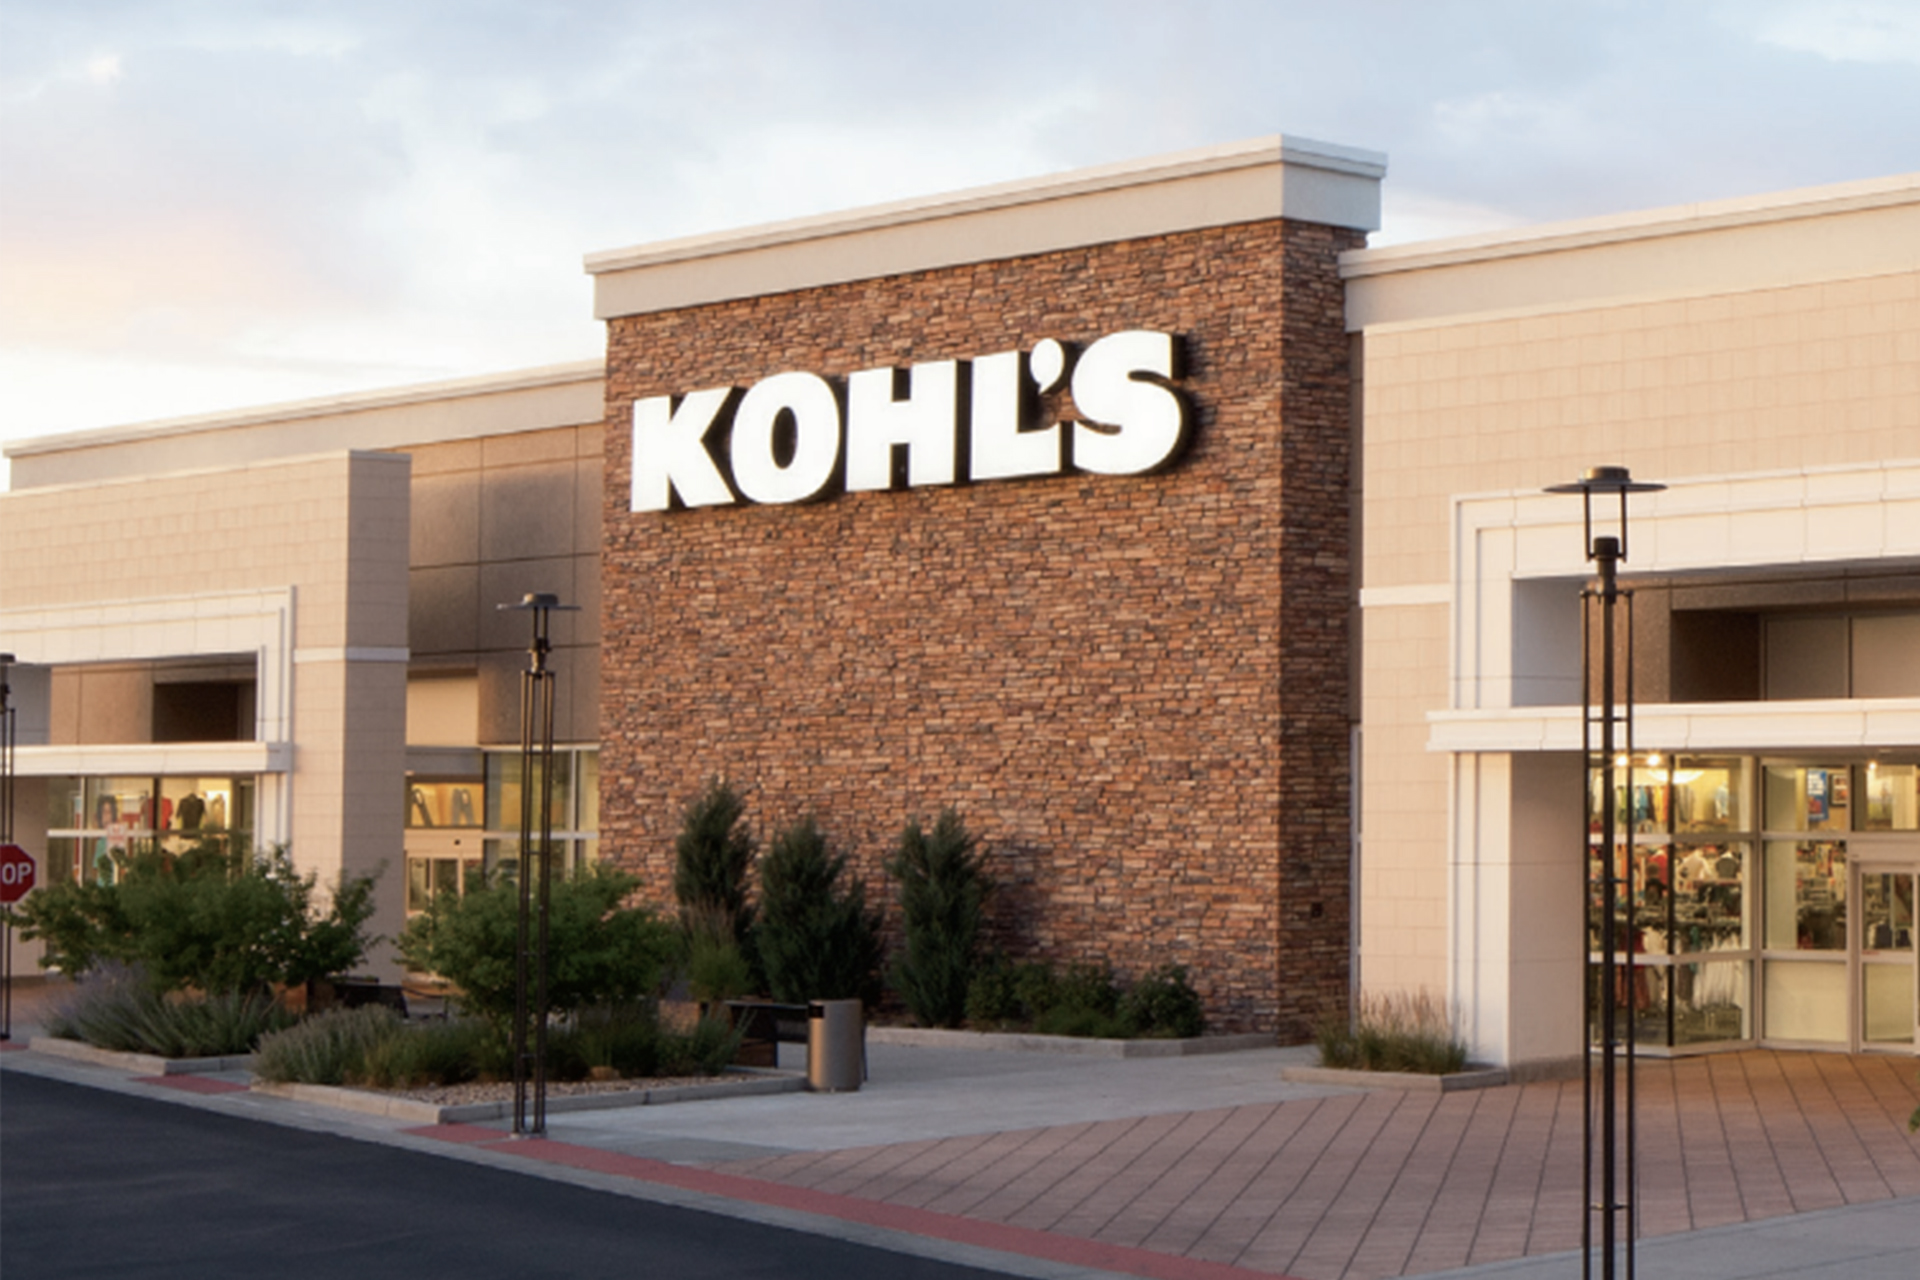 Kohl's Faces Timely Housewares Upside